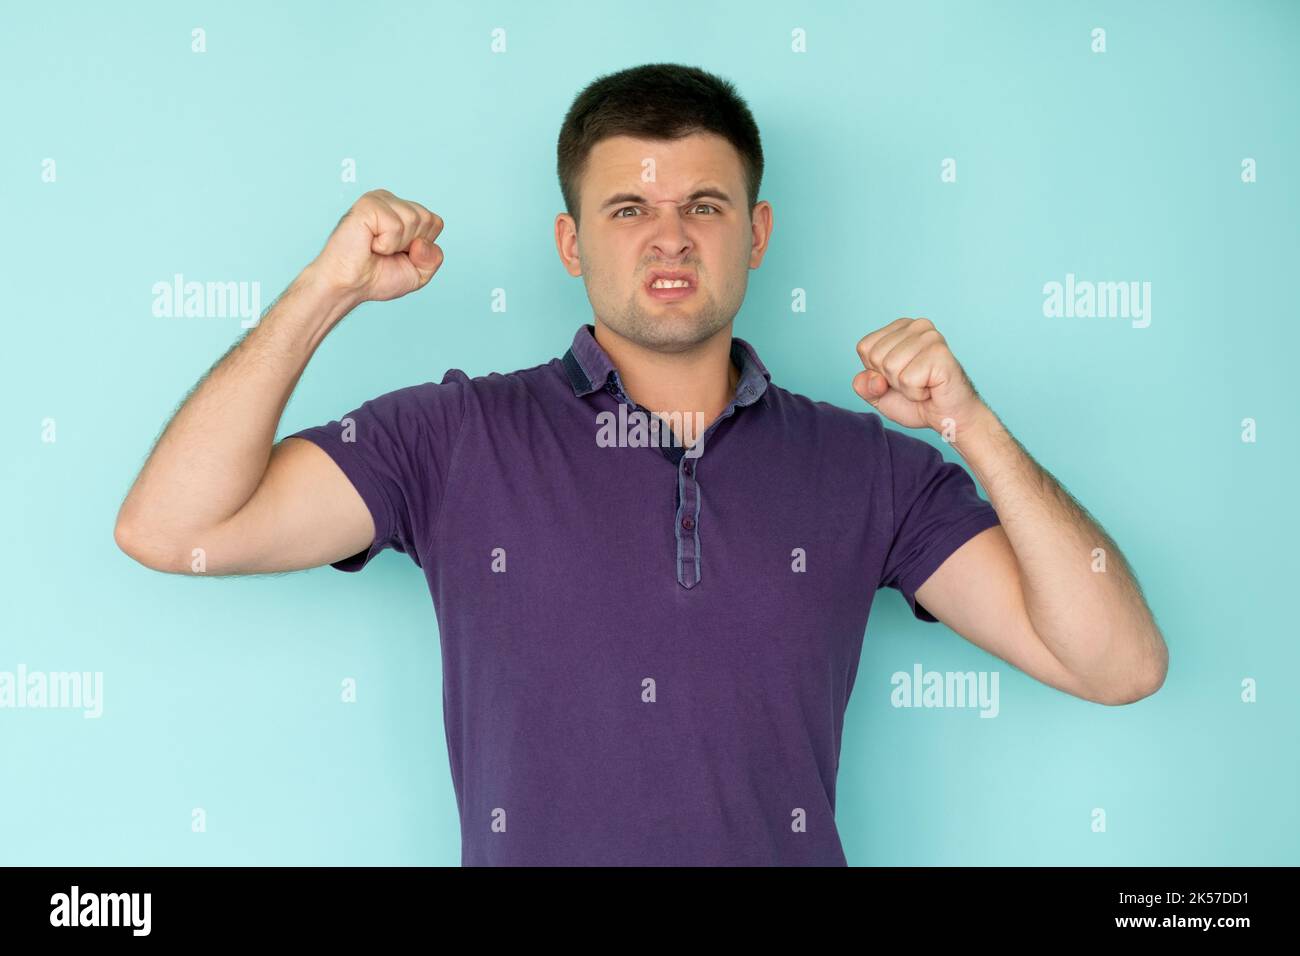 physical aggression angry man conflict solution Stock Photo